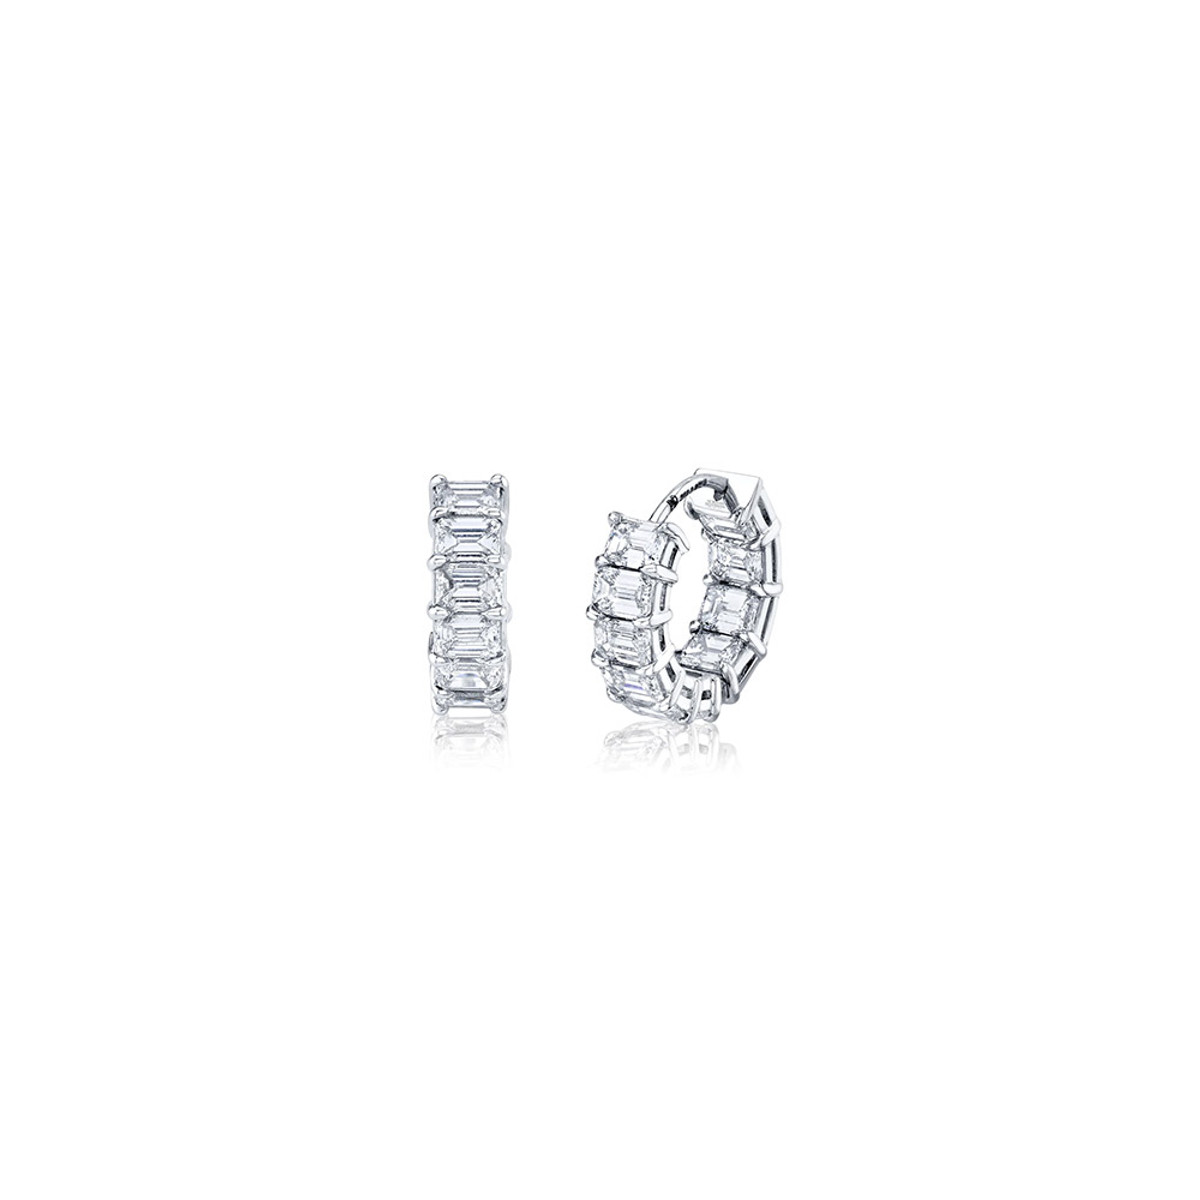 Hyde Park Collection 18K White Gold Emerald Diamond Hoop Earrings-39506 Product Image